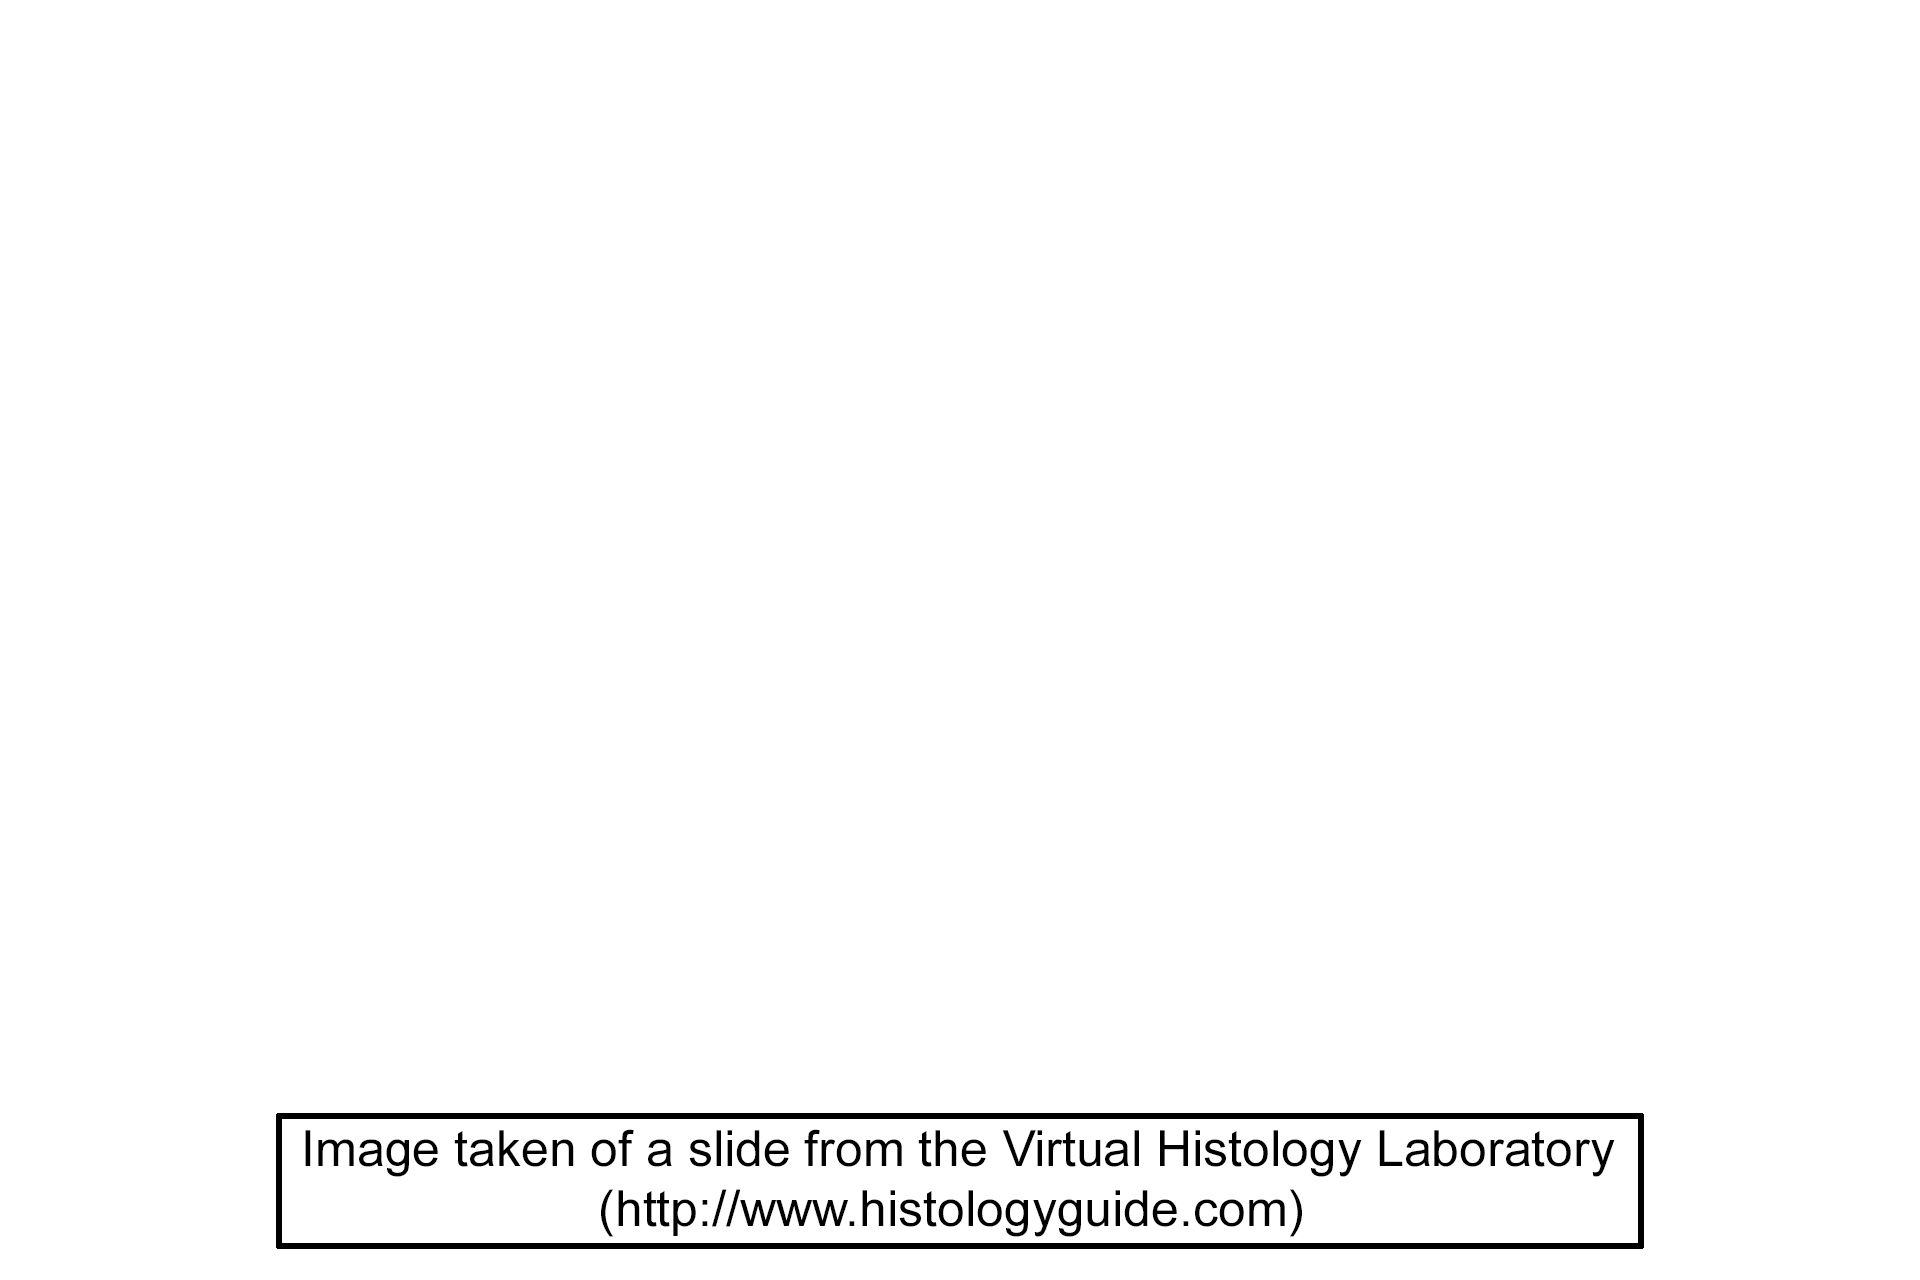 Image source > <p>Image taken of a slide from the Virtual Histology Laboratory website (http://www.histologyguide.com)</p>
